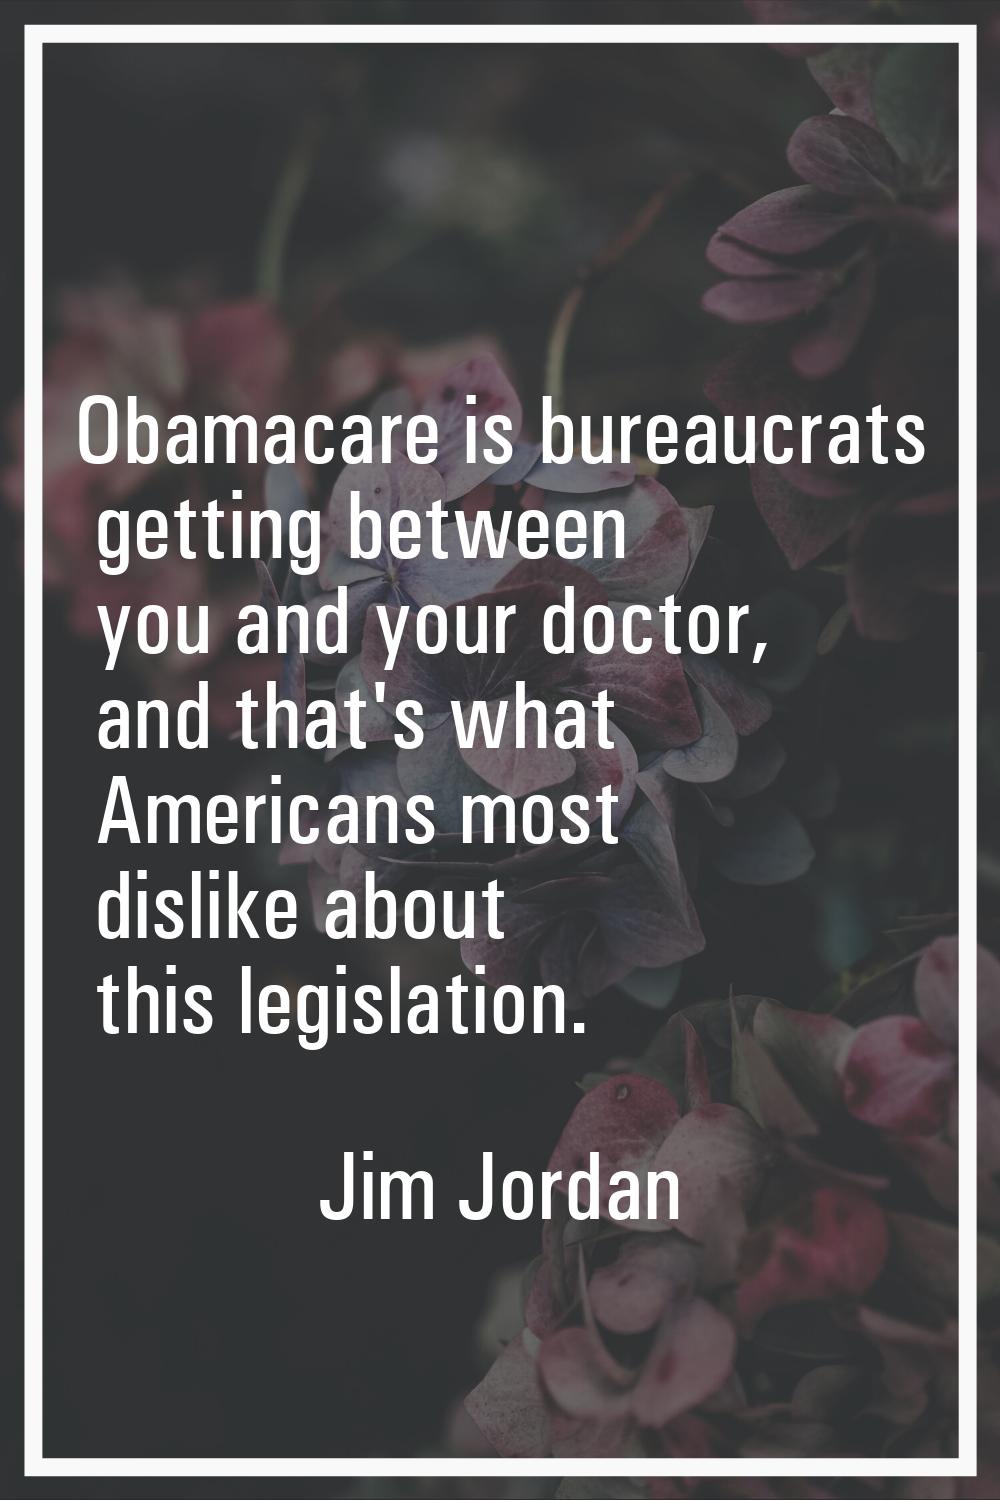 Obamacare is bureaucrats getting between you and your doctor, and that's what Americans most dislik